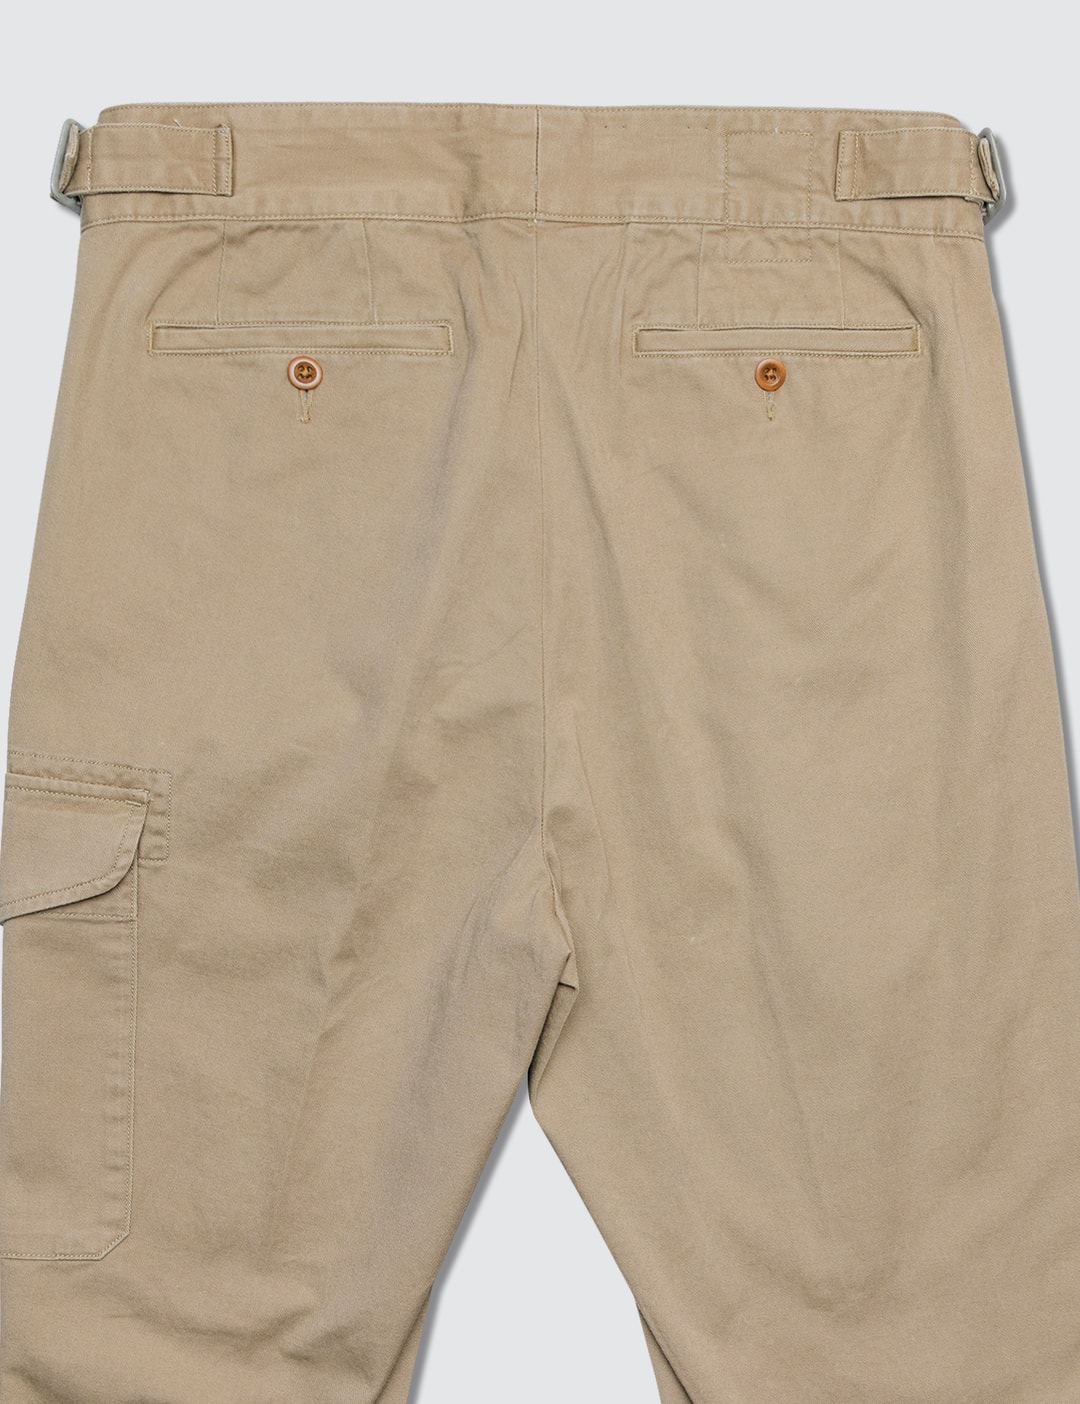 Polo Ralph Lauren - Baggy Fit British Military Pant | HBX - Globally ...